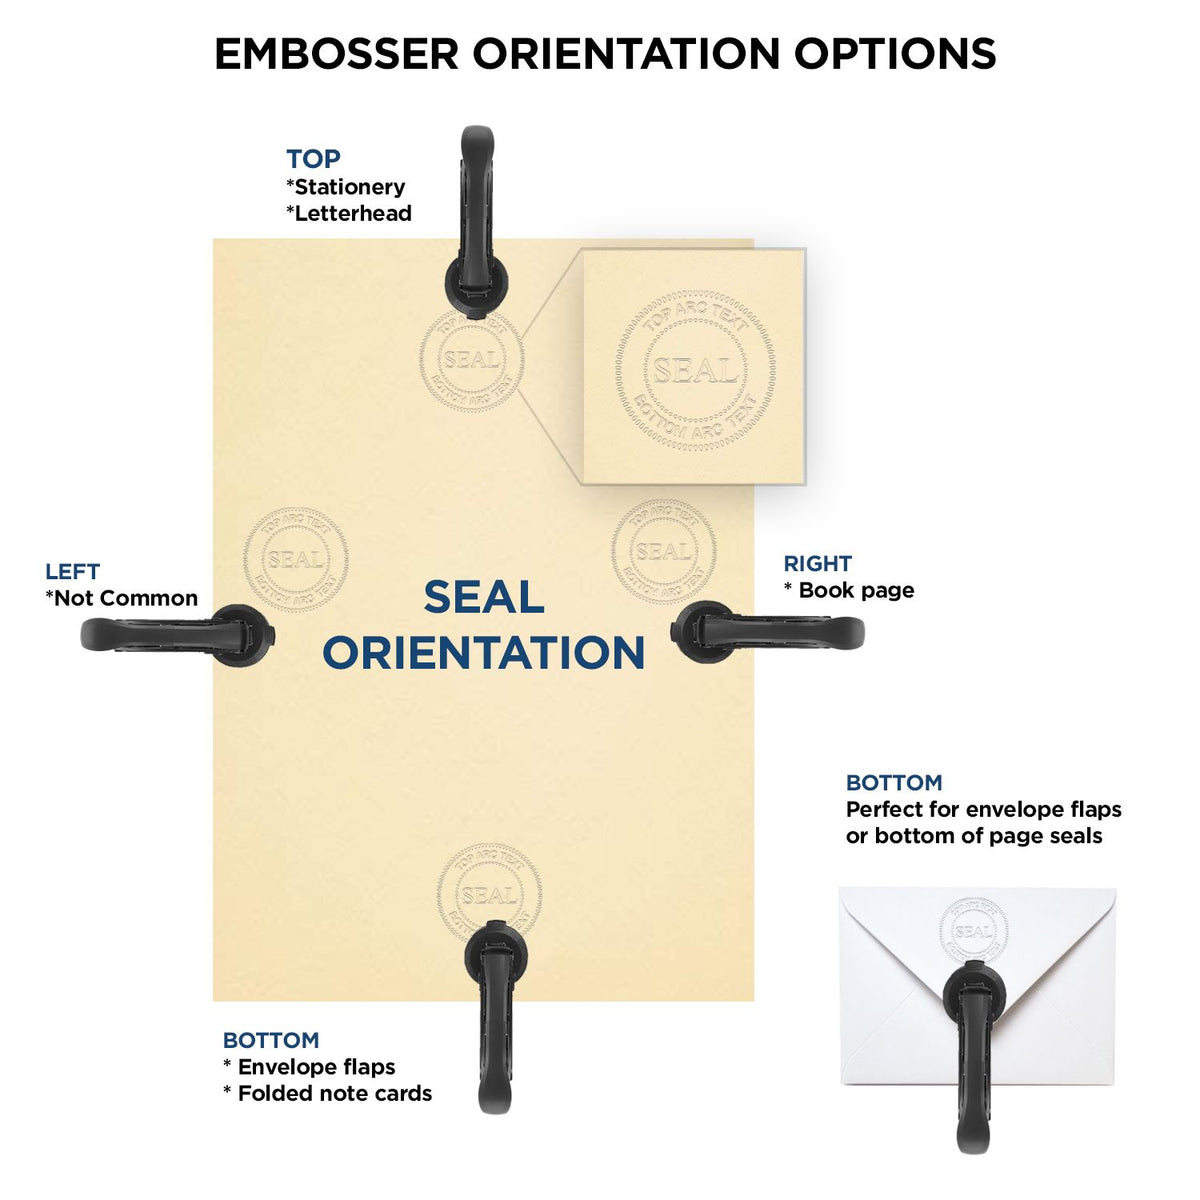 An infographic for the State of Utah Long Reach Architectural Embossing Seal showing embosser orientation, this is showing examples of a top, bottom, right and left insert.